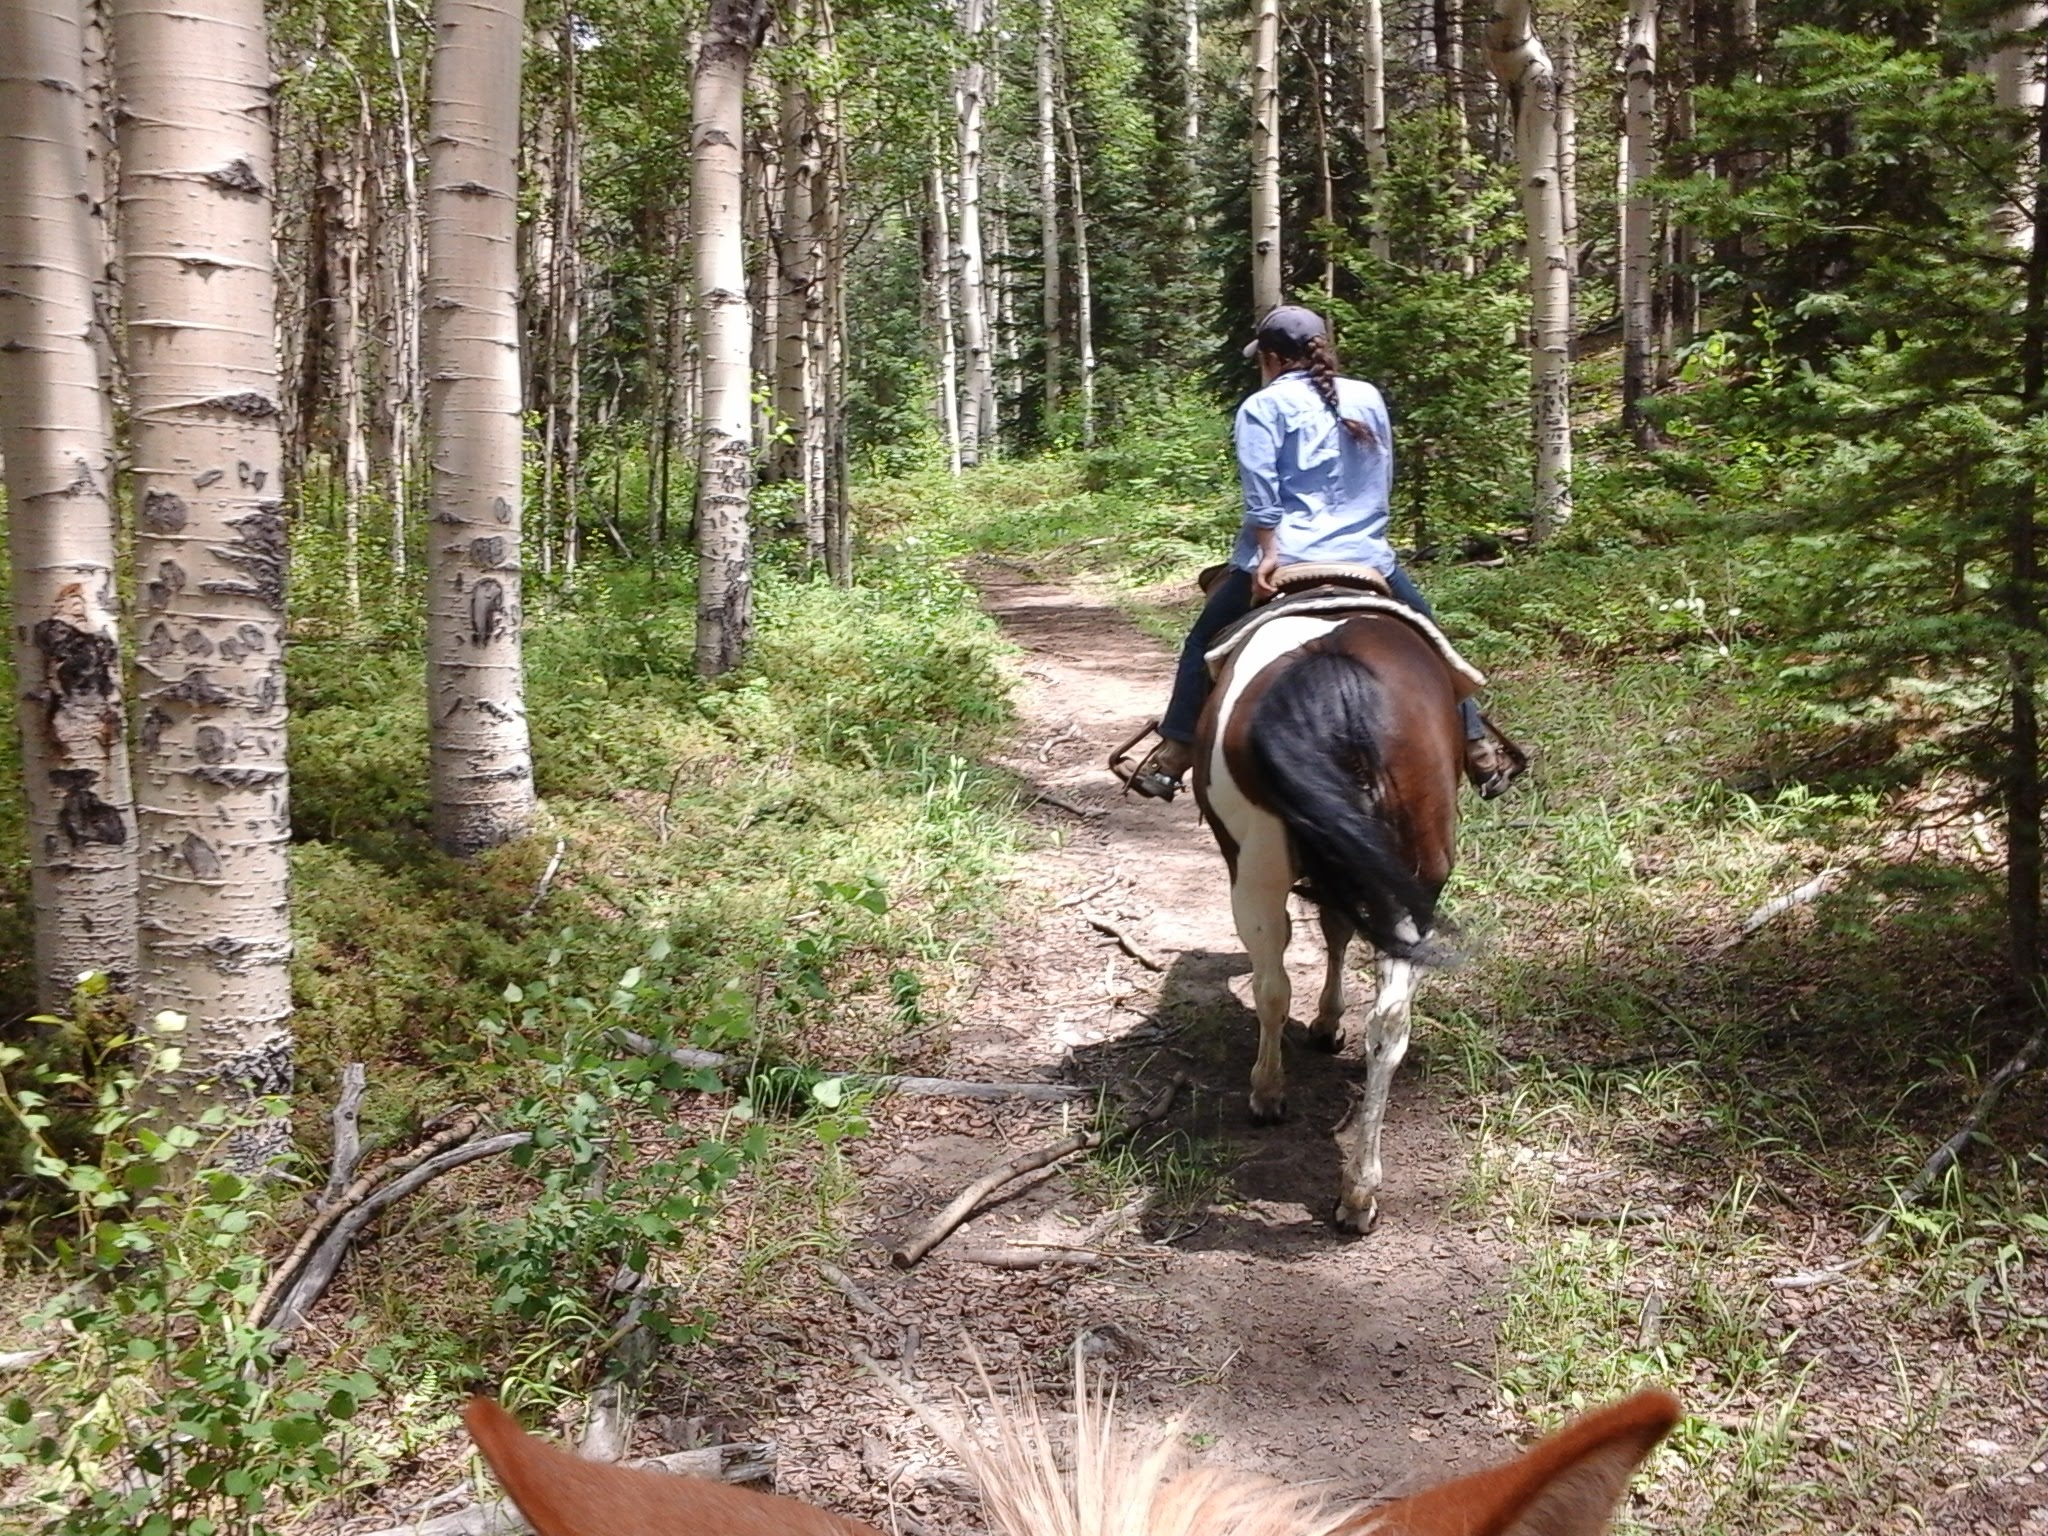 Exterior photo in a forest with a lady riding a horse on a trail with Aspen trees on each side.